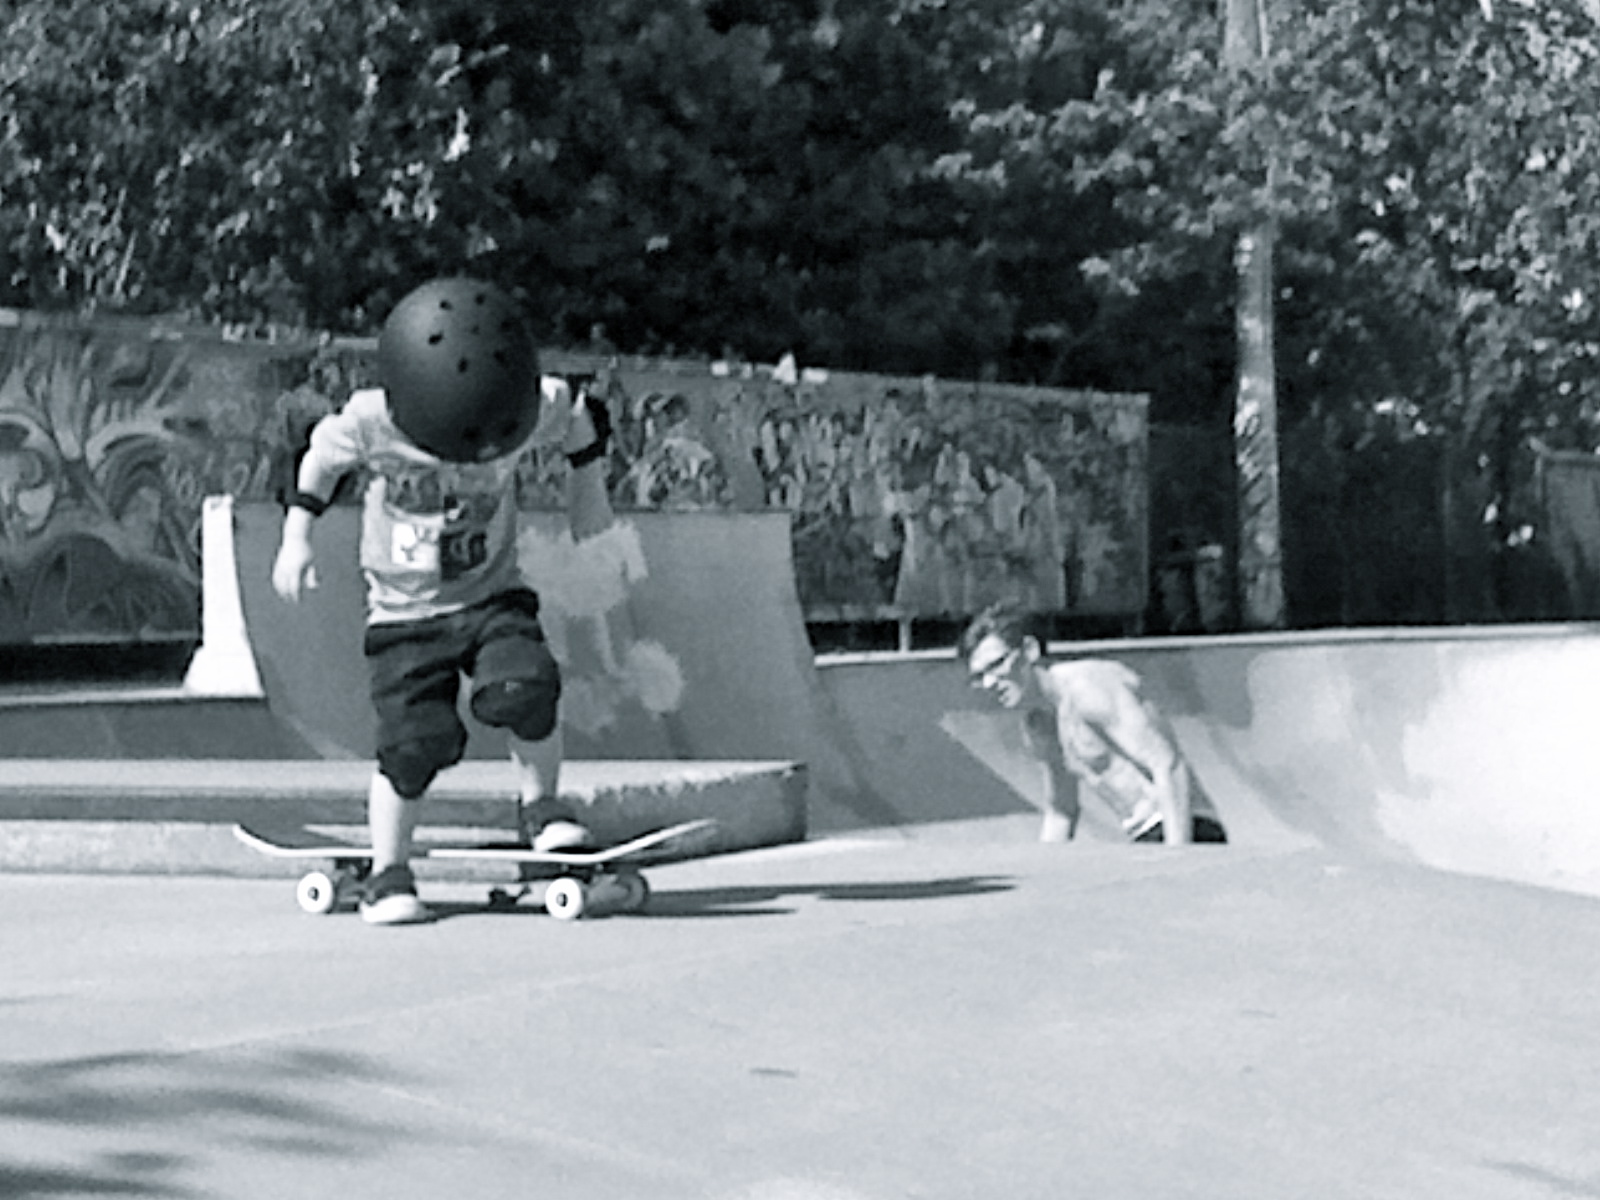 a child skateboards on the pavement as a person squats